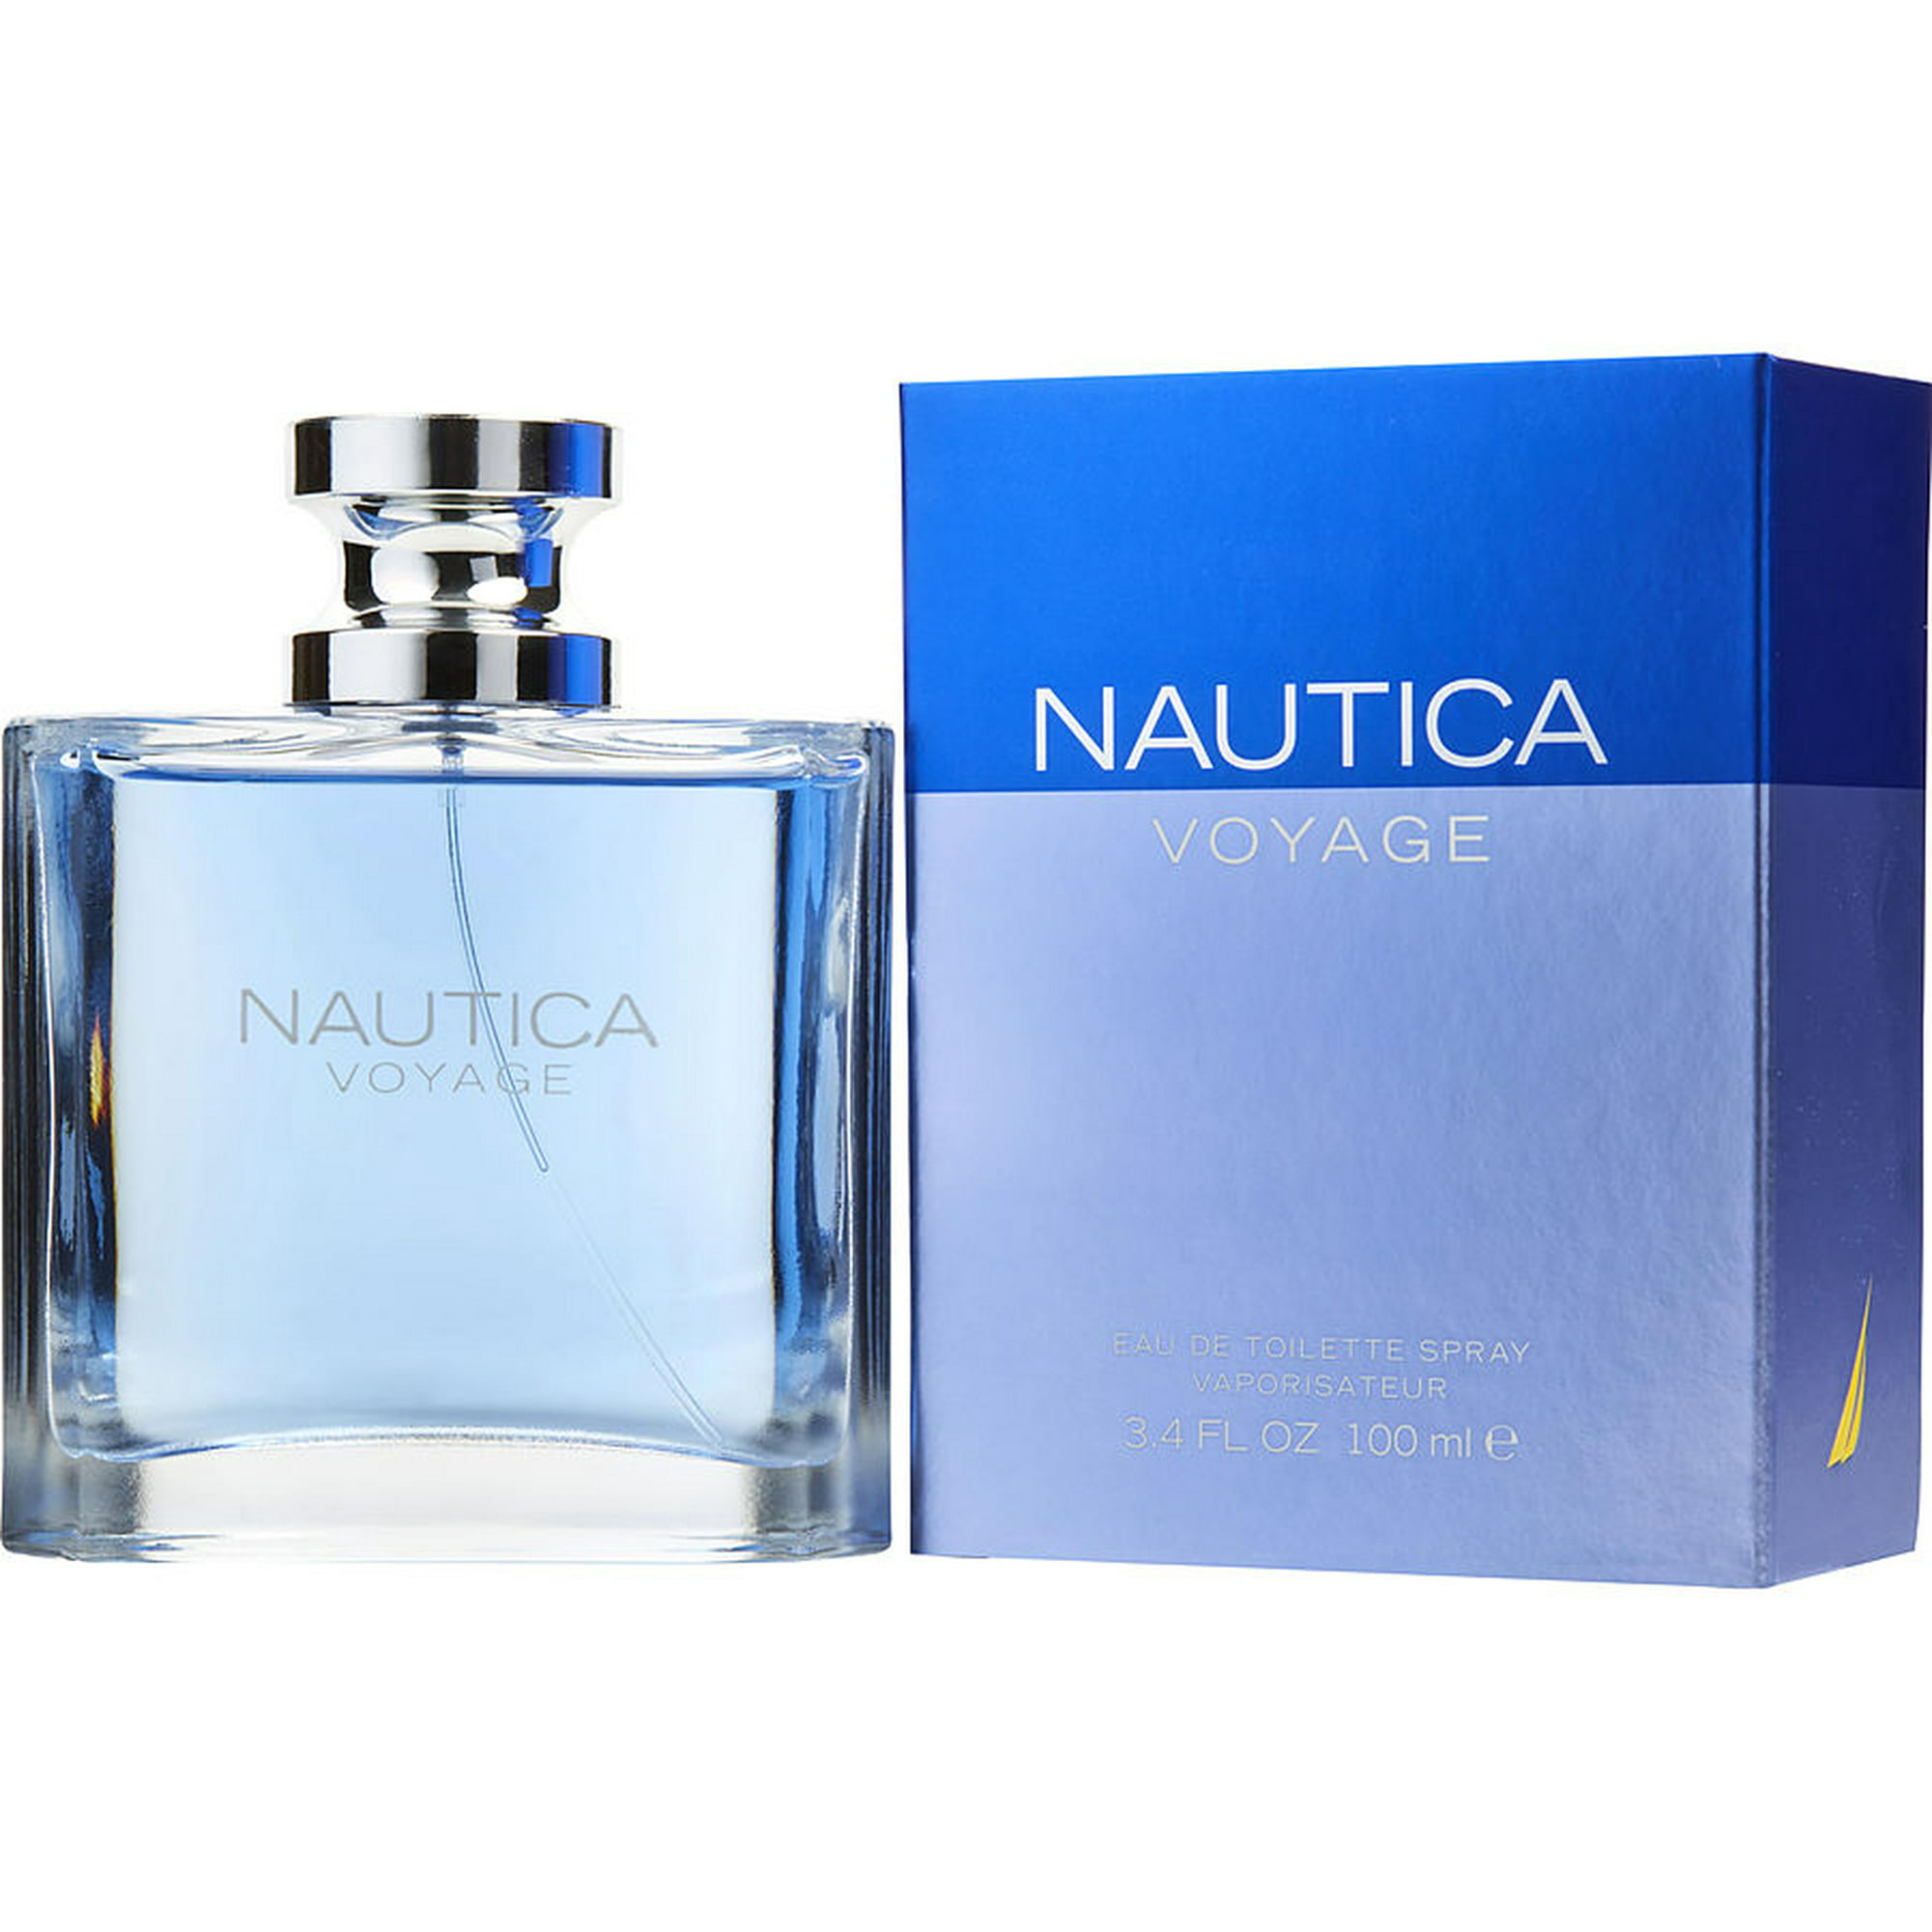 is nautica voyage cologne good